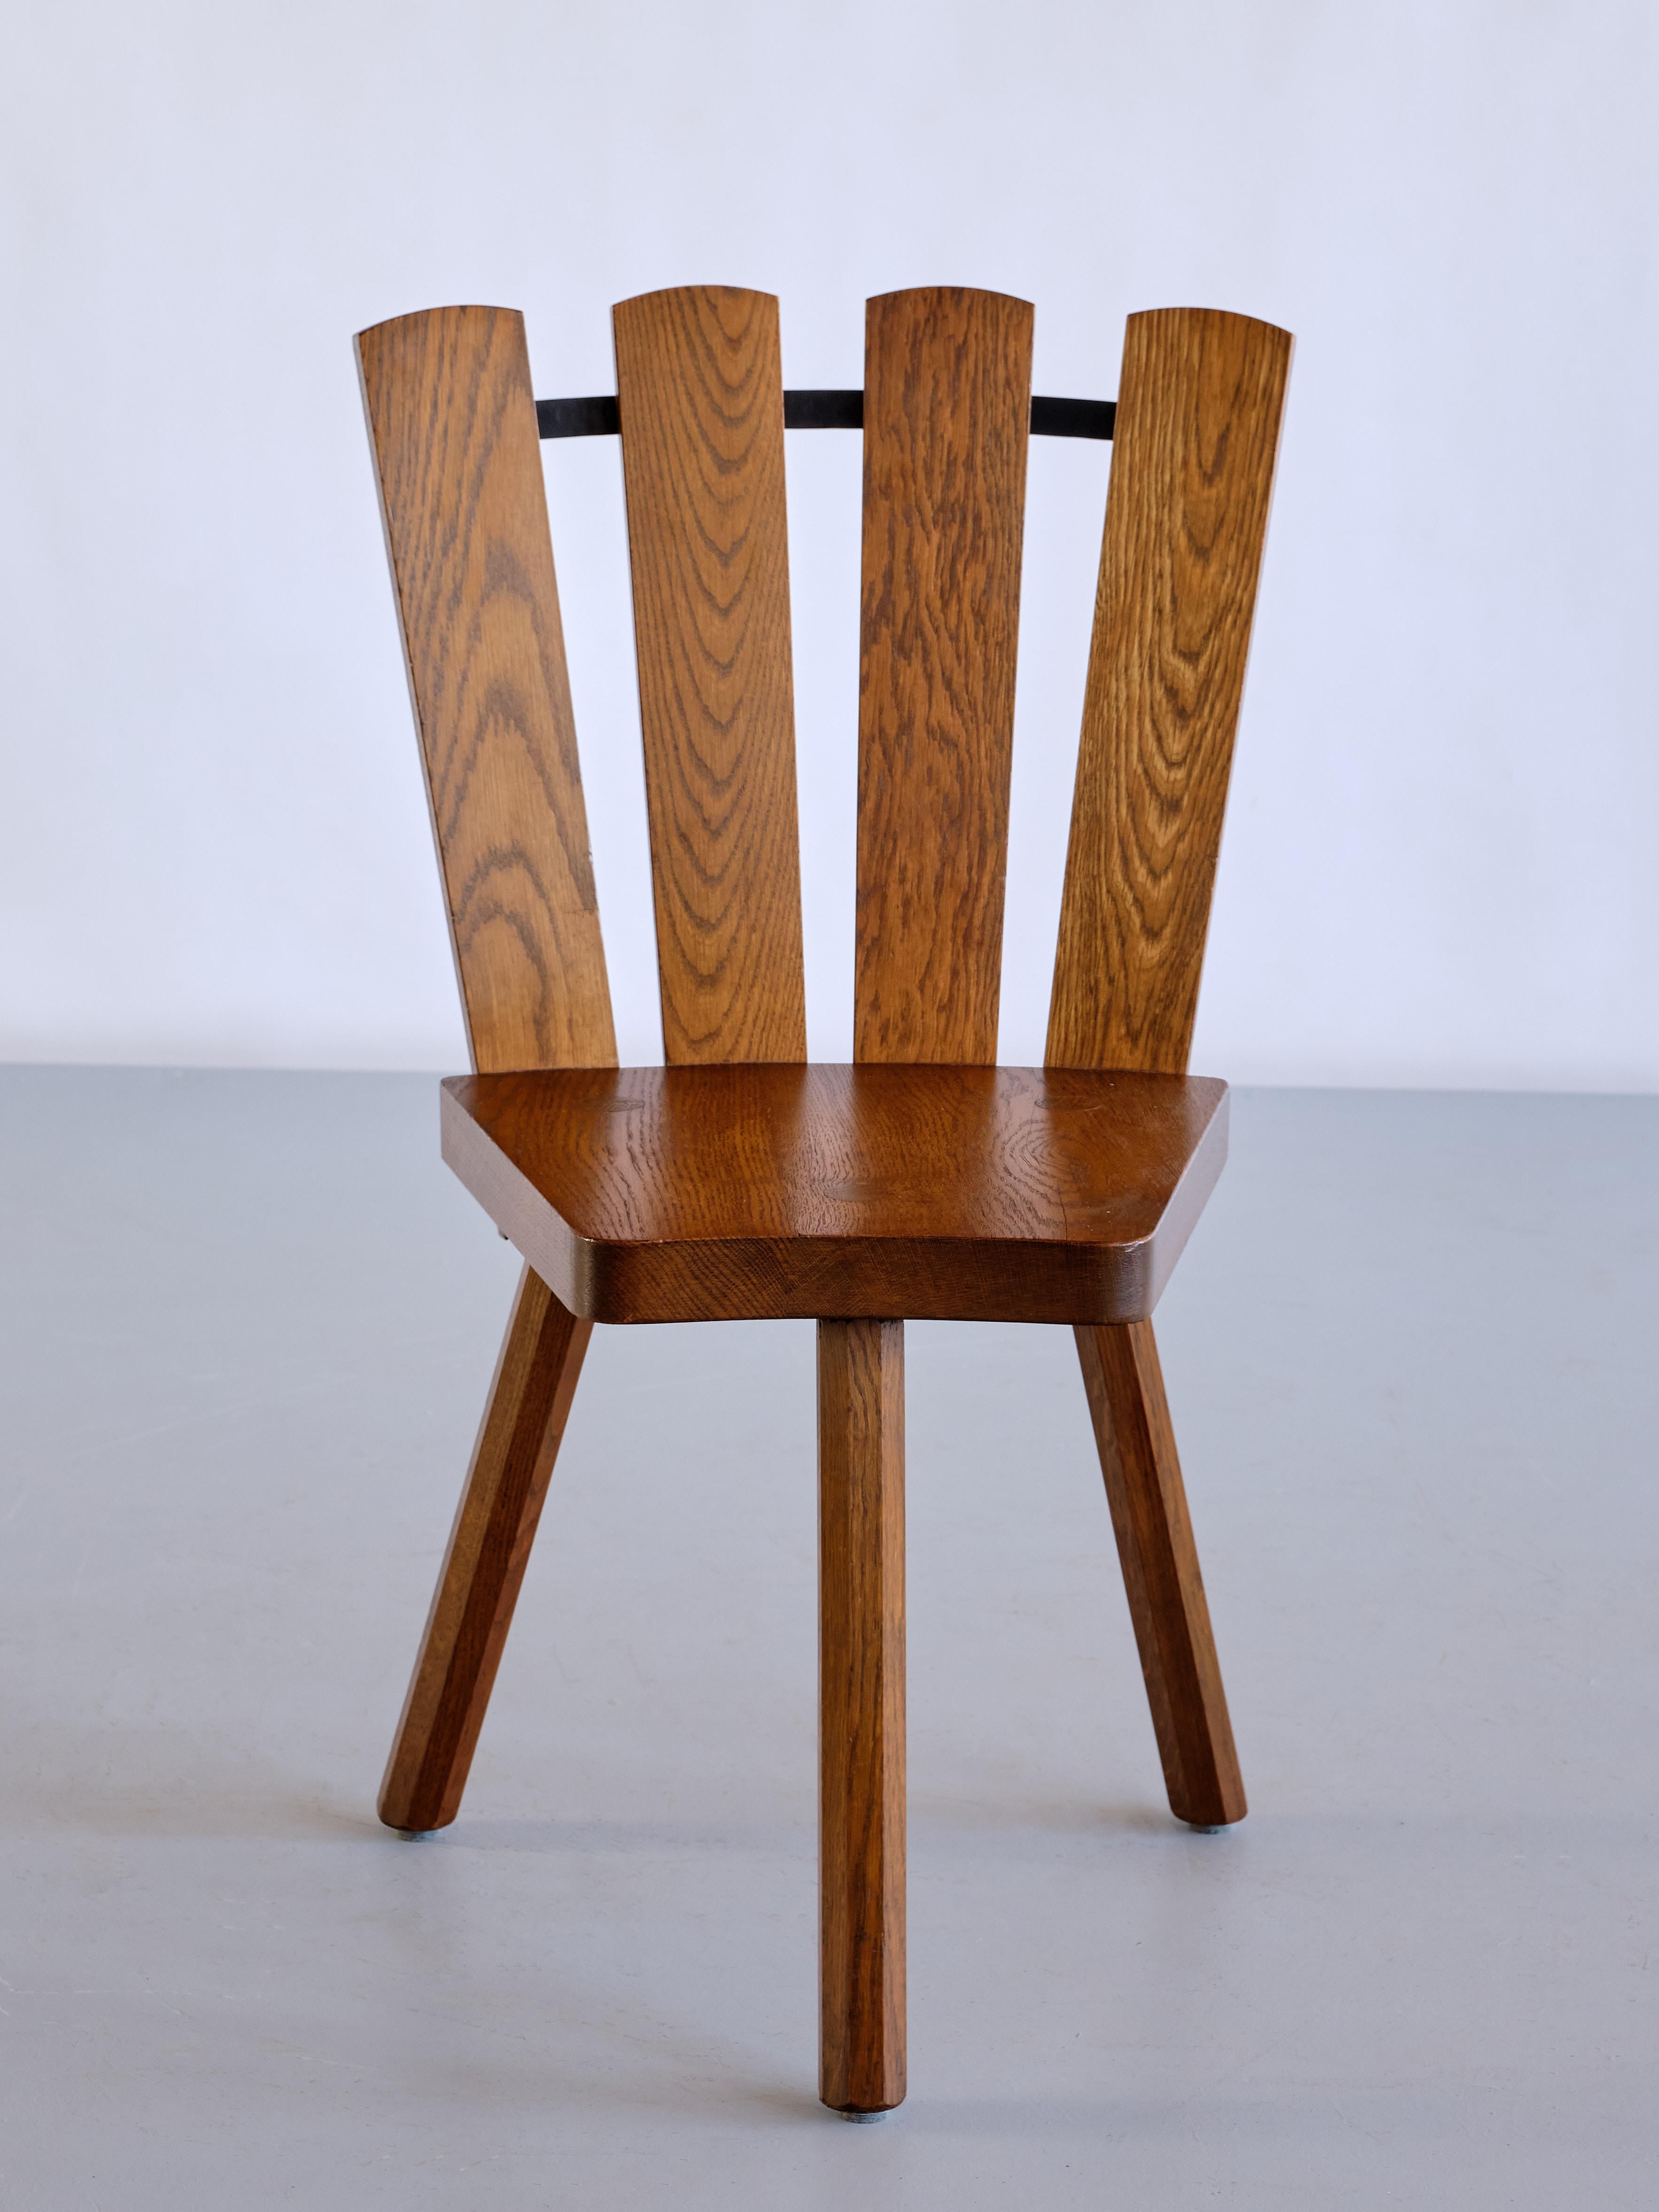 Set of Four French Modern Tripod Oak Dining Chairs with Fan Shaped Back, 1950s For Sale 2